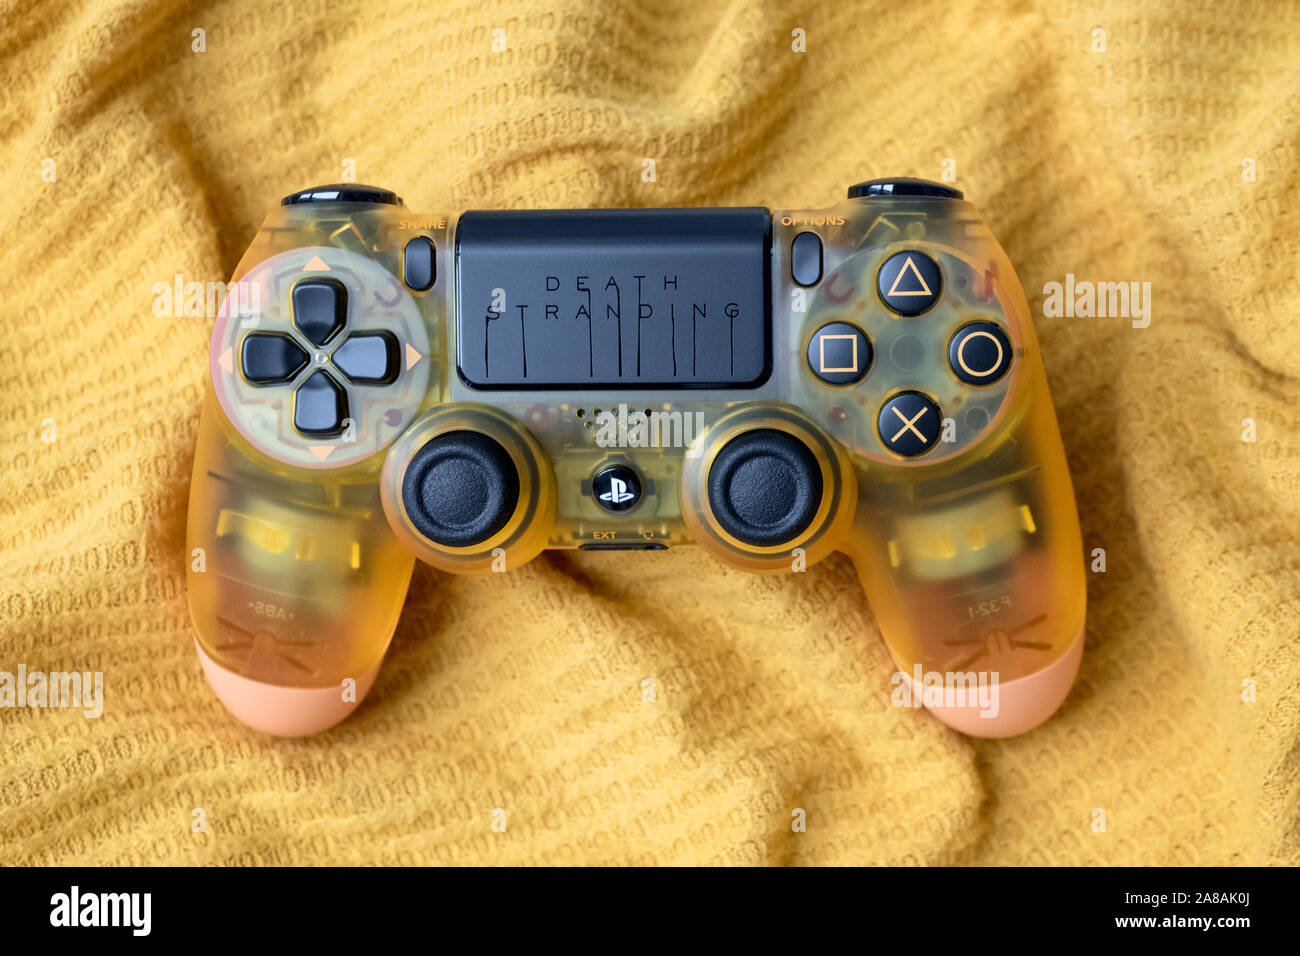 KIEV, UKRAINE - November 07, 2019: Death Stranding Limited Edition PS4 Pro.  Transparent dualshock controller for PlayStation 4 on yellow fabric Stock  Photo - Alamy